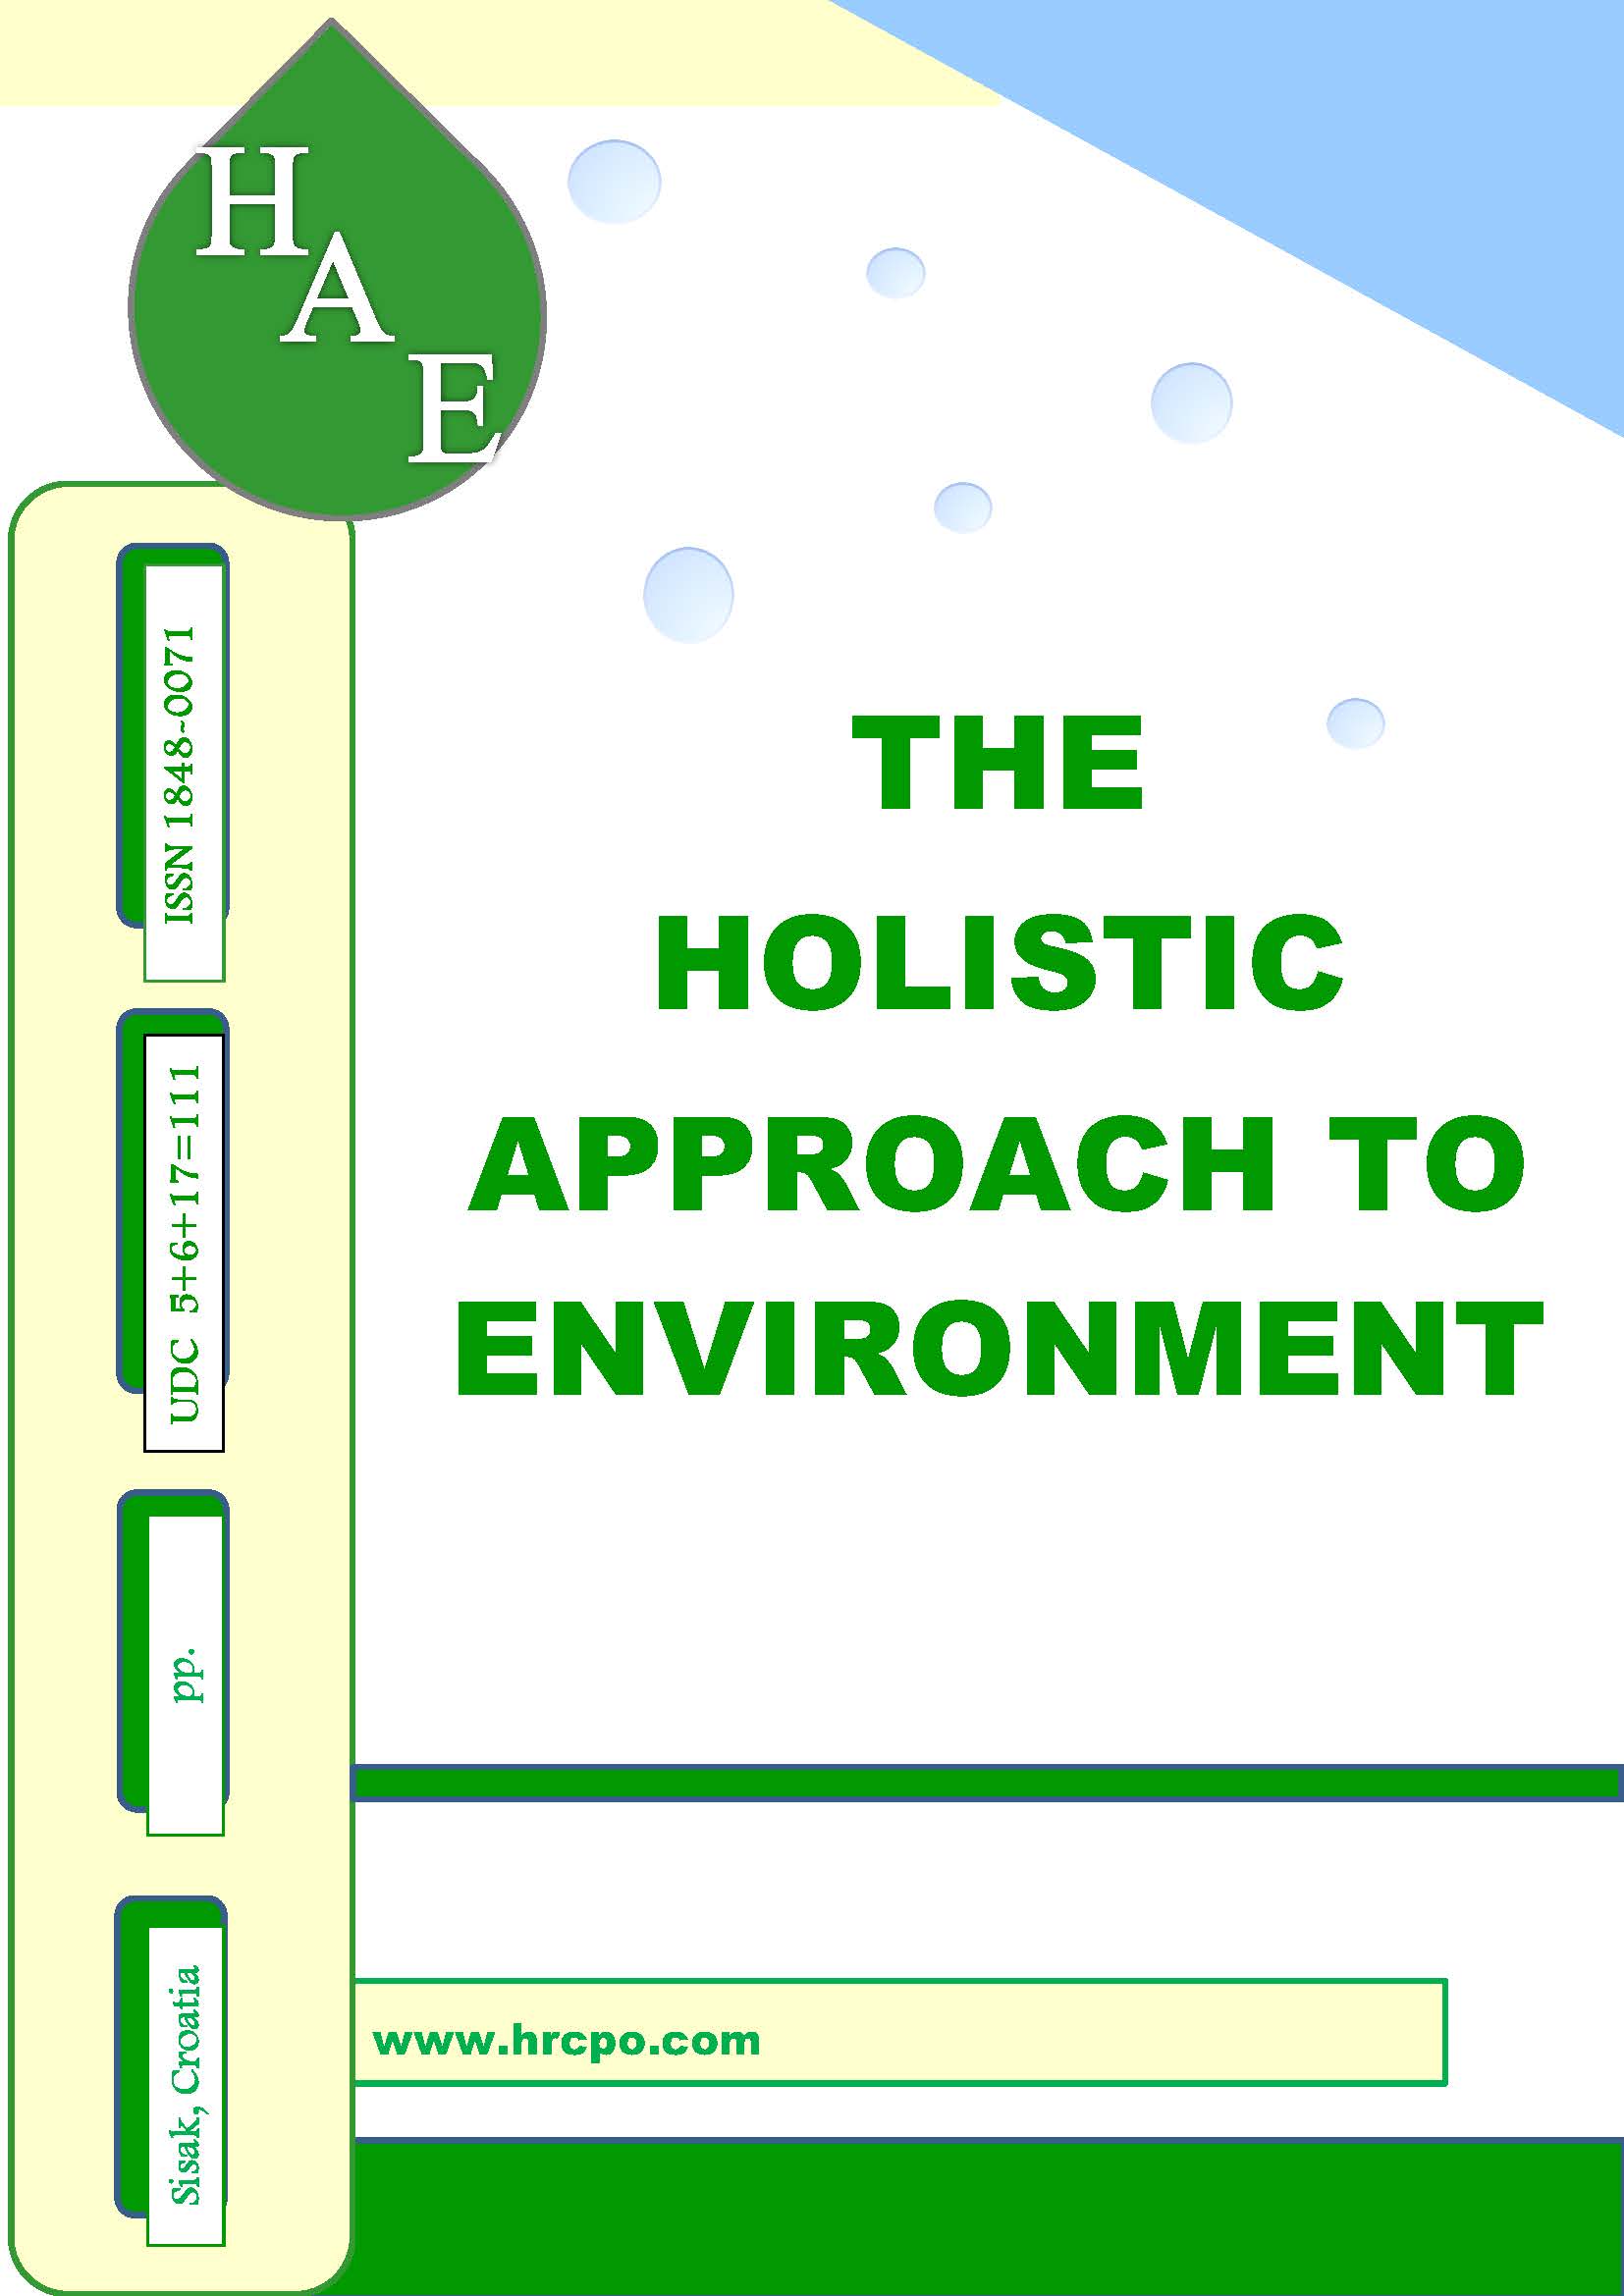 The holistic approach to environment